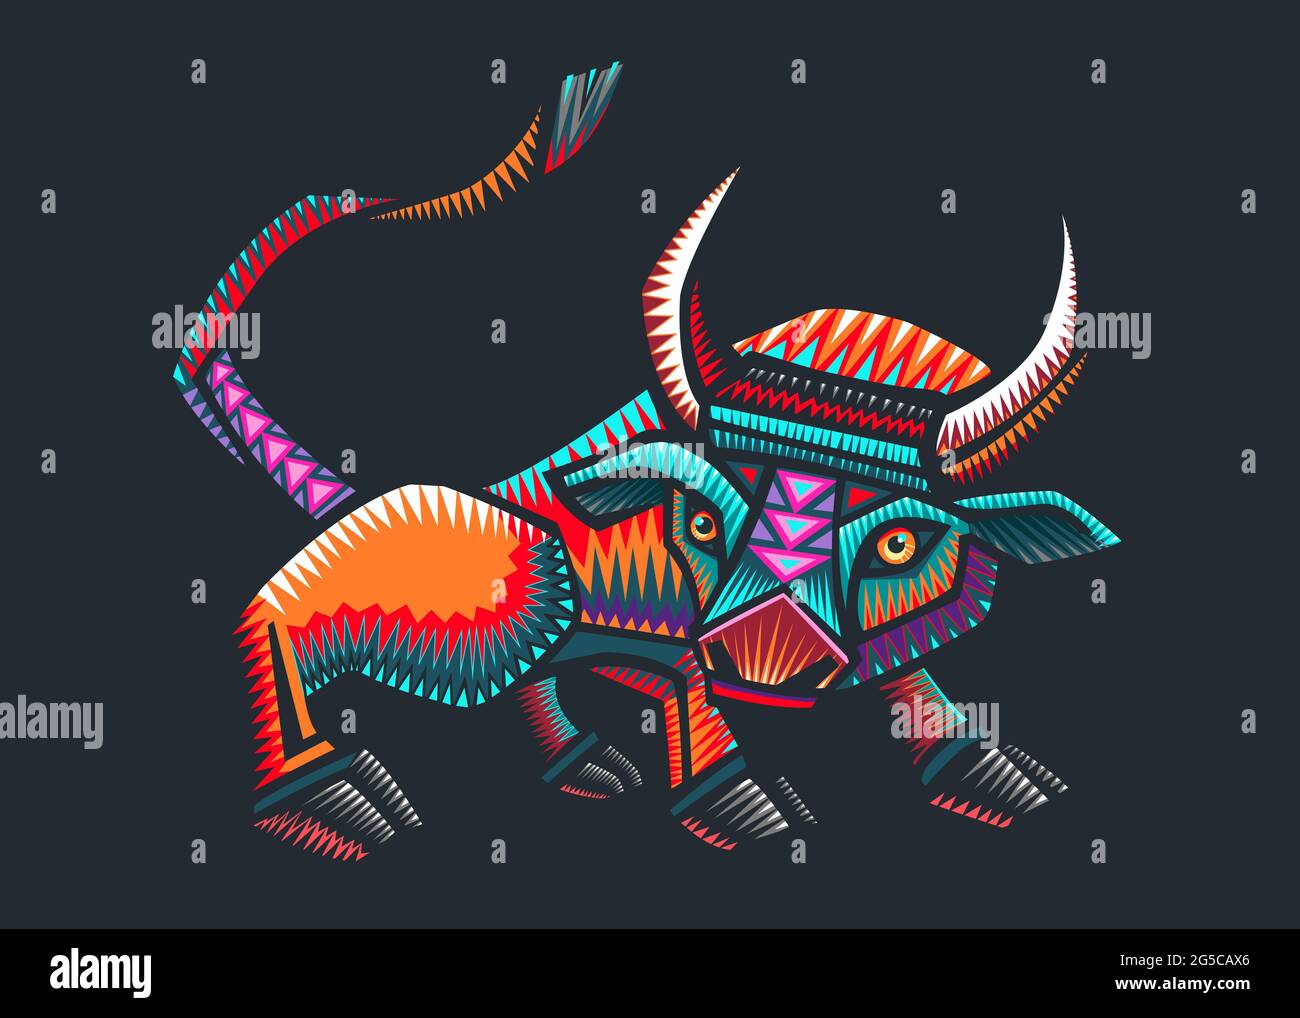 Hand drawn vector illustration or drawing of a colorful mexican indigenous bull in a traditional alebrije style Stock Photo